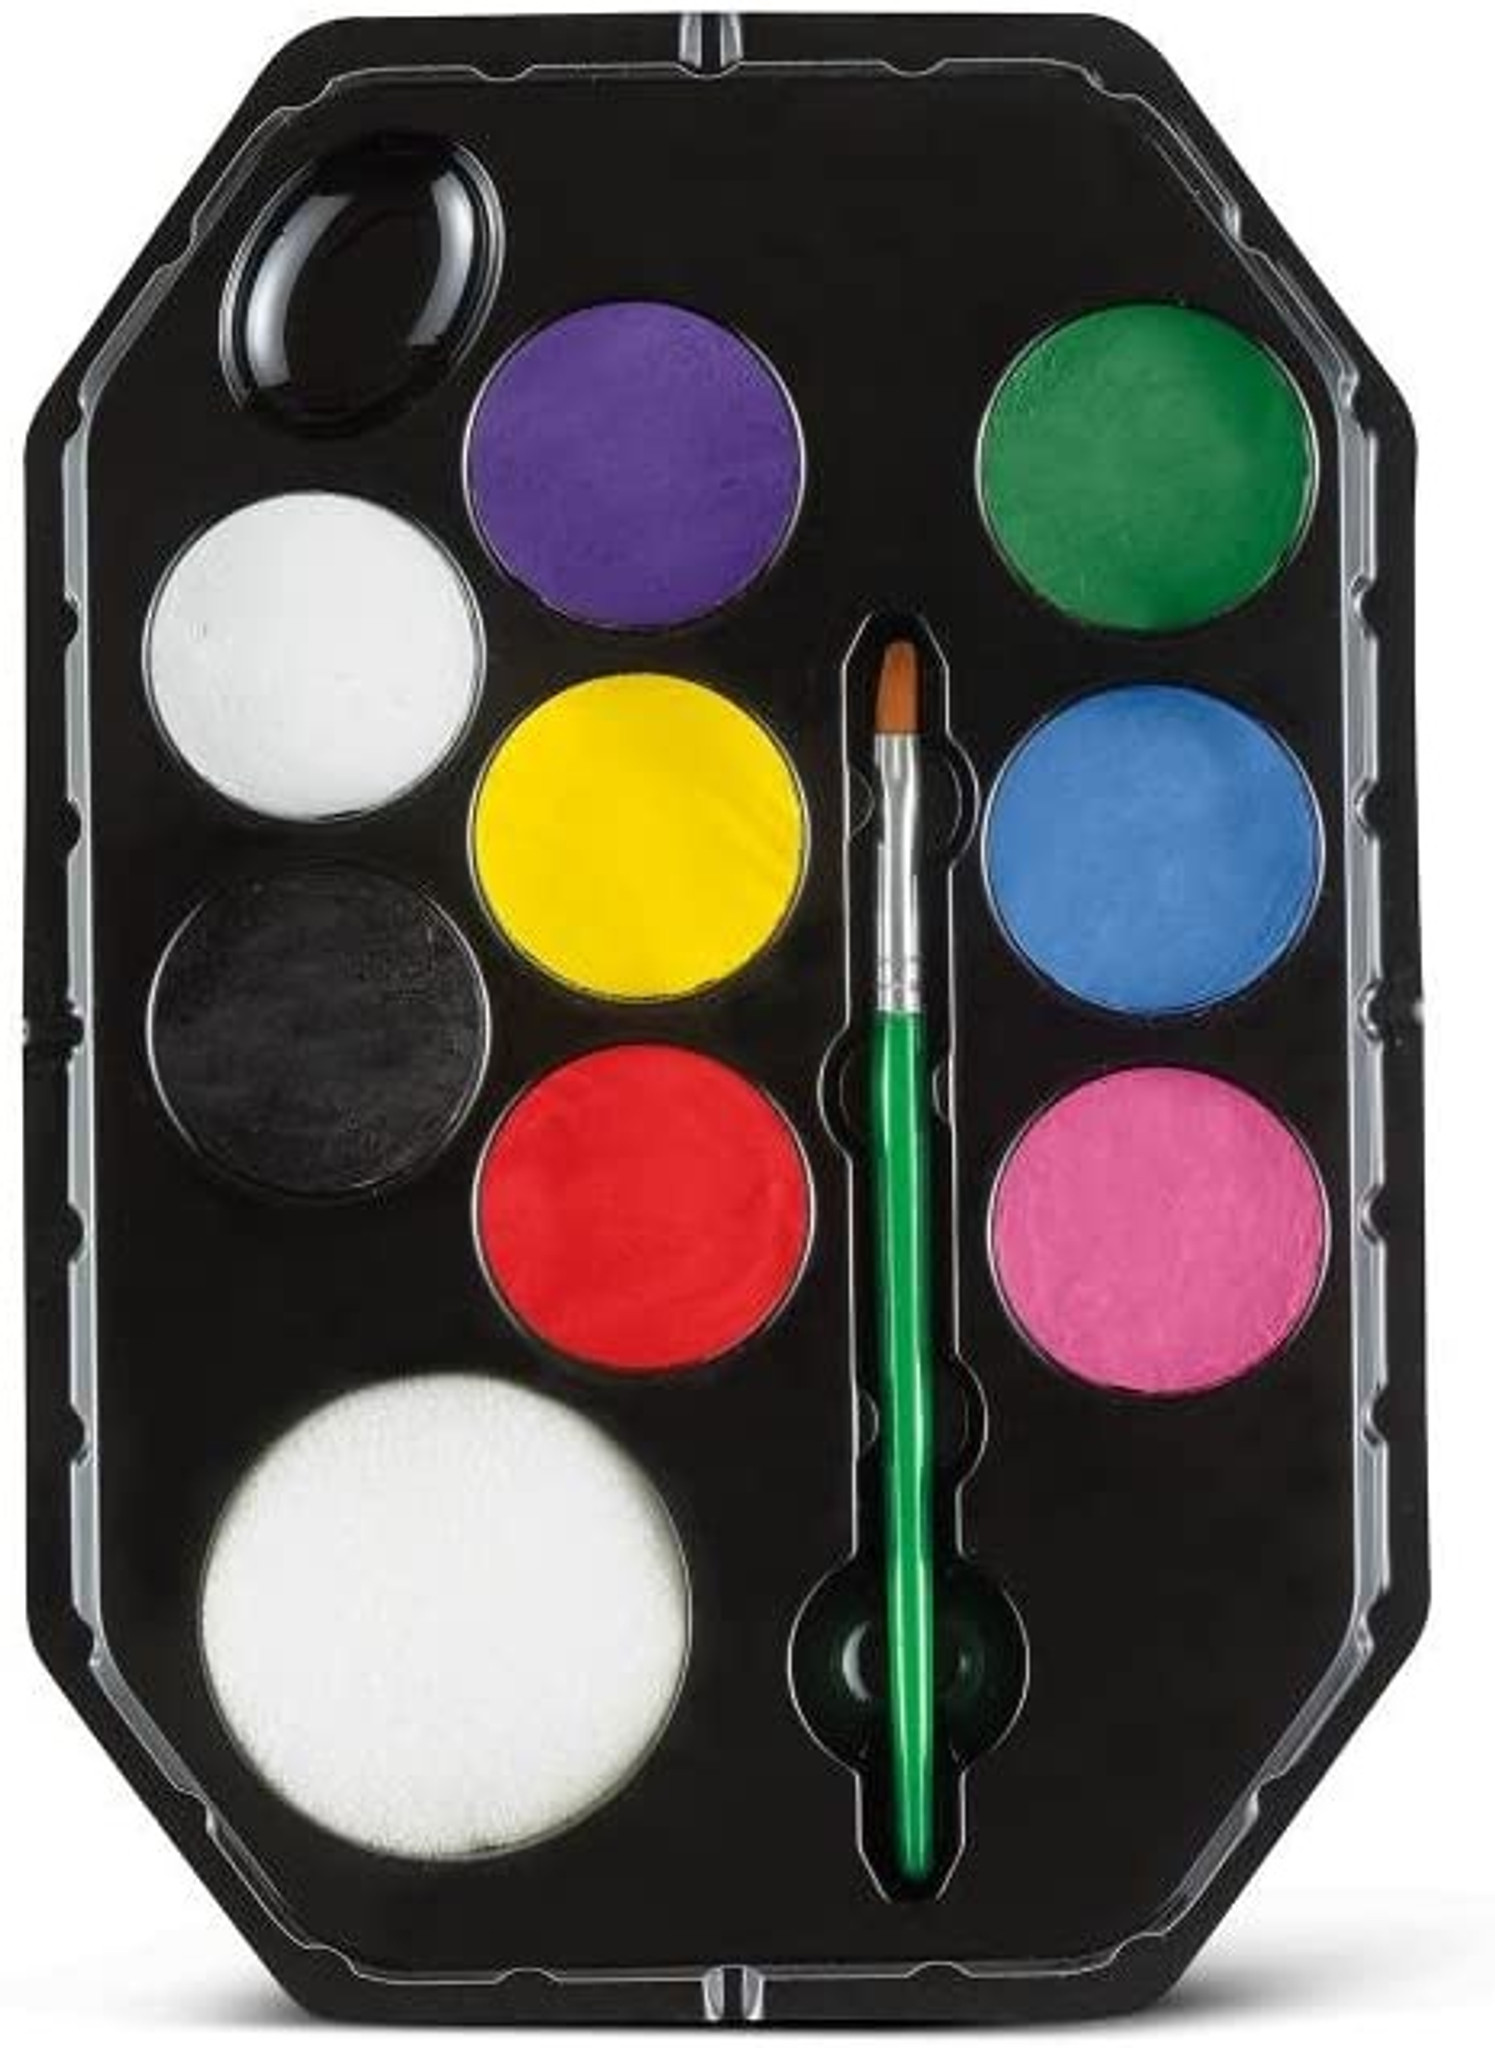 Snazaroo Princess Party Face Painting Kit. Washable, Quality